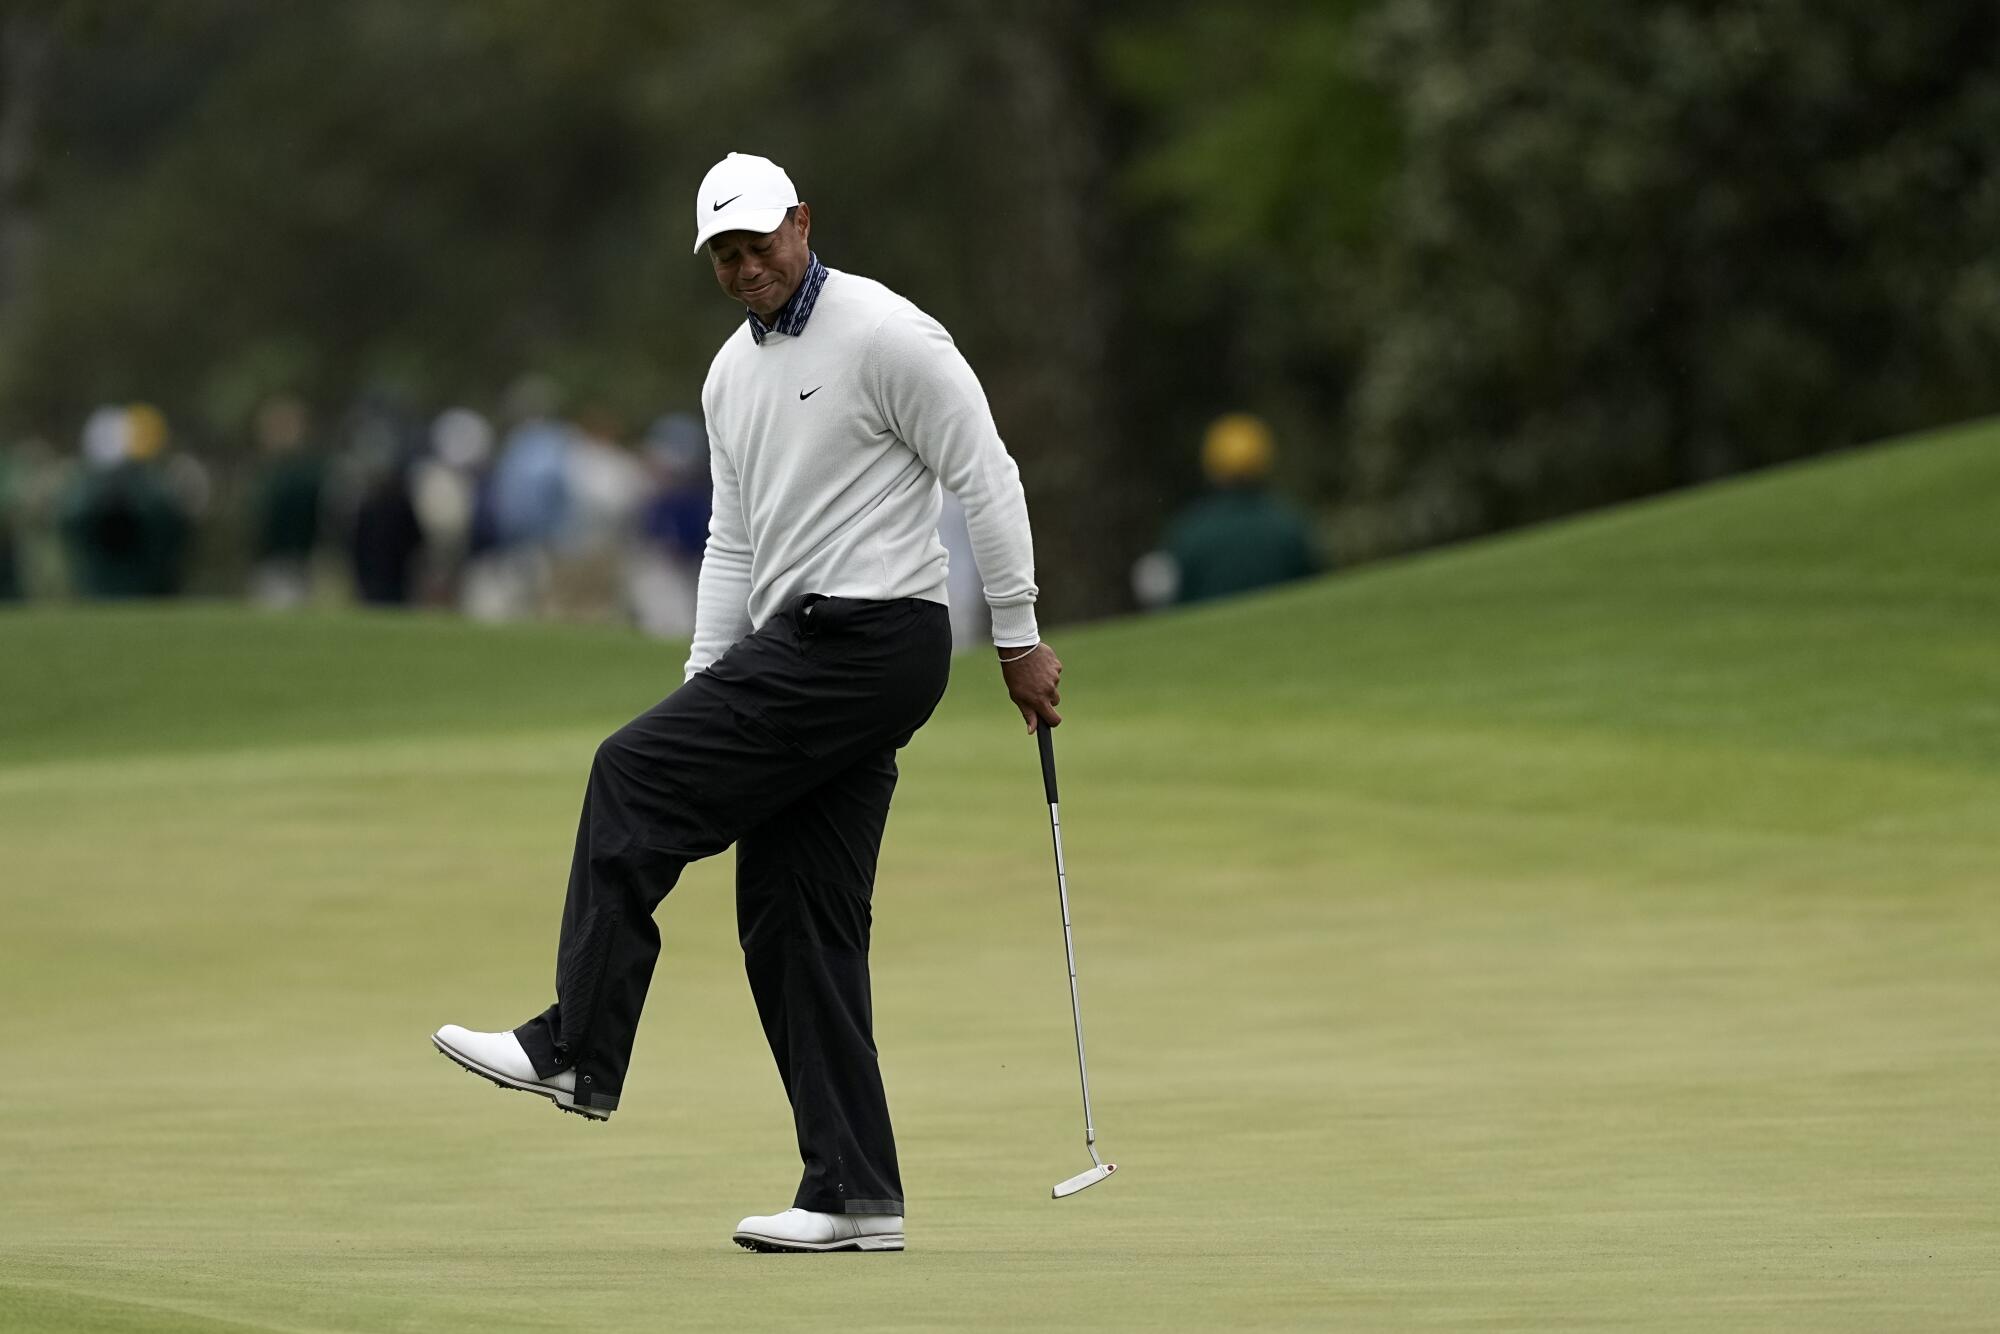 Tiger Woods reacts after missing a birdie putt on the eighth green during the third round.